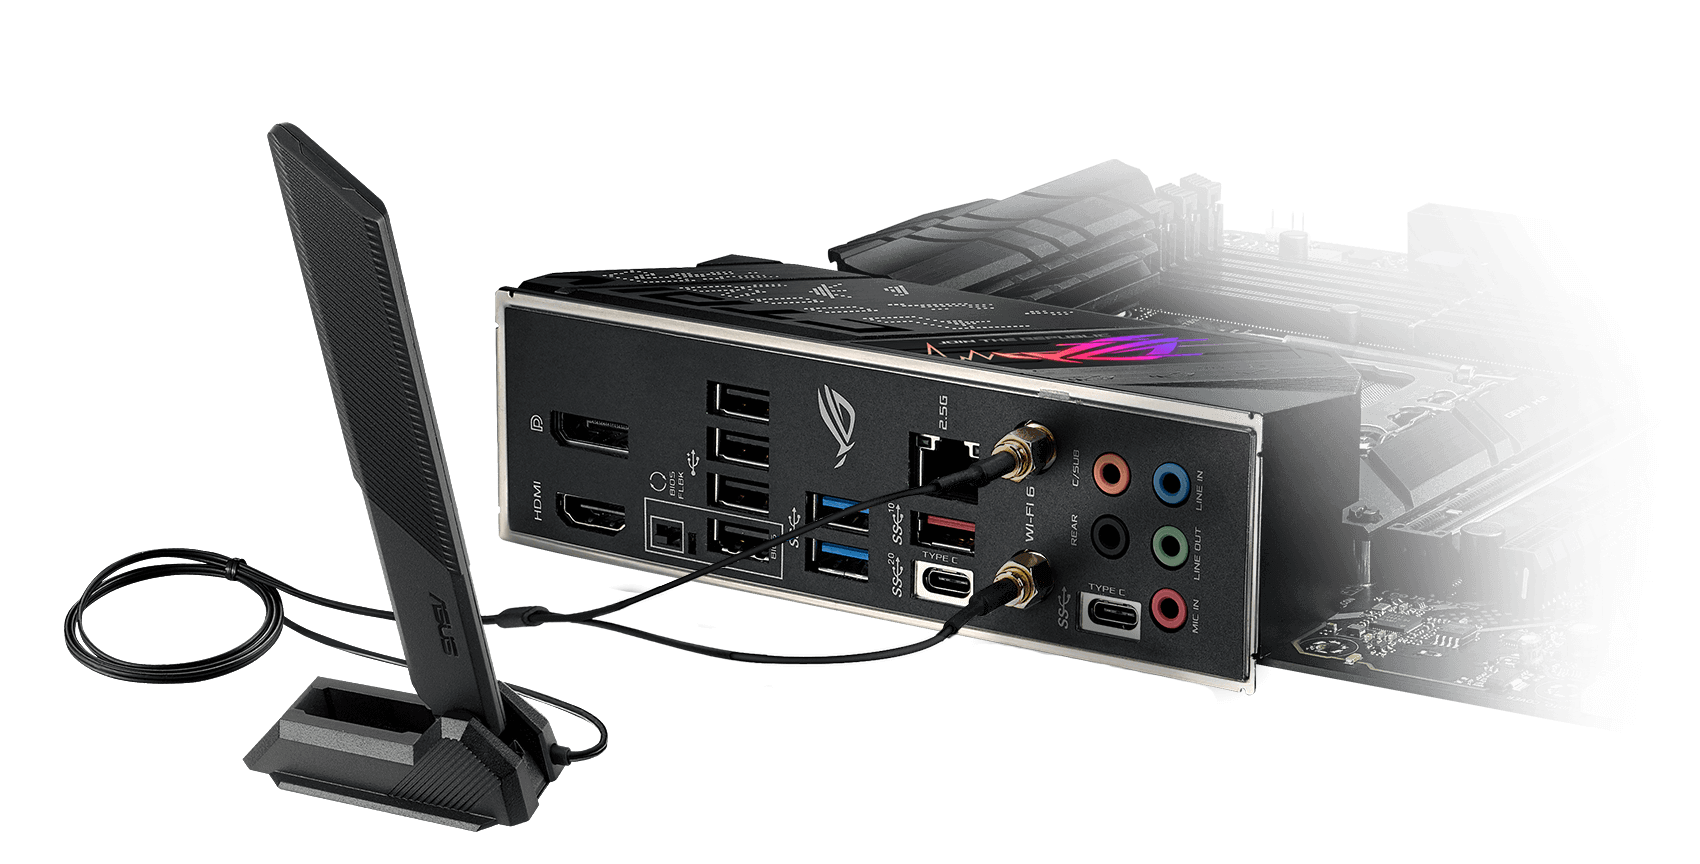 ROG Strix B660-G Gaming WiFi features WiFi 6, along with 2.5 Gb Ethernet.